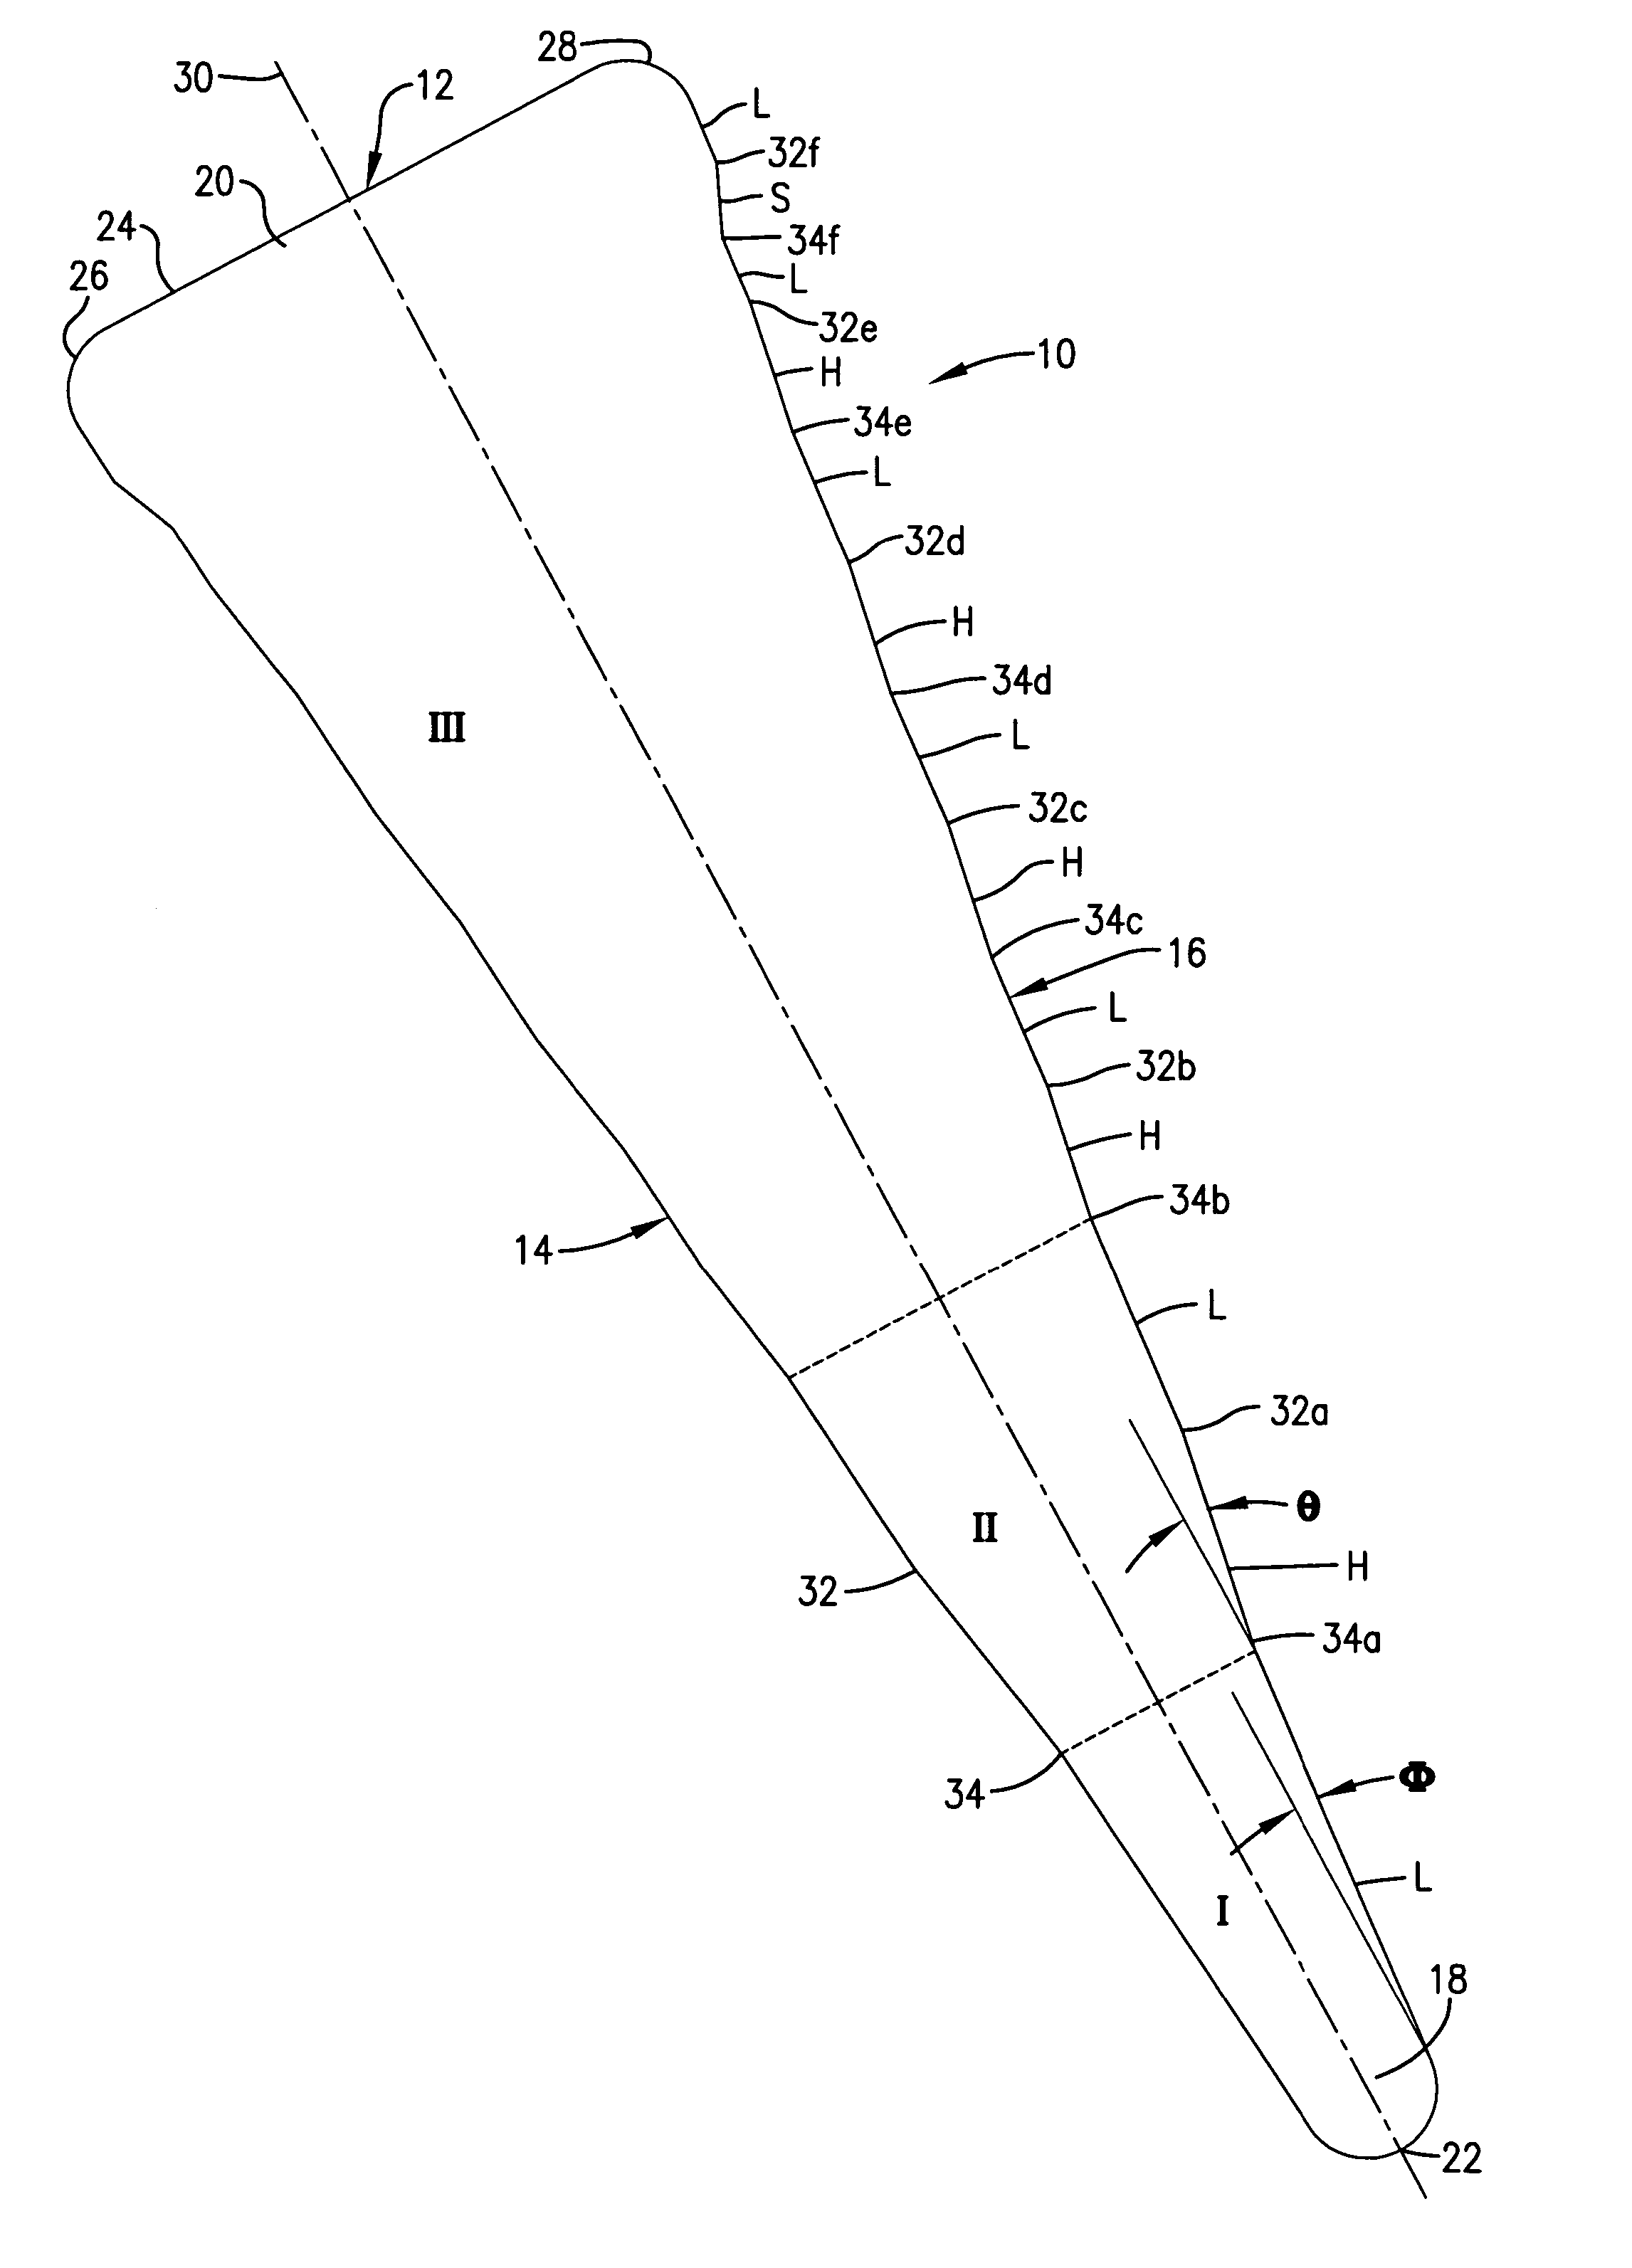 Retaining wedge for concrete forms